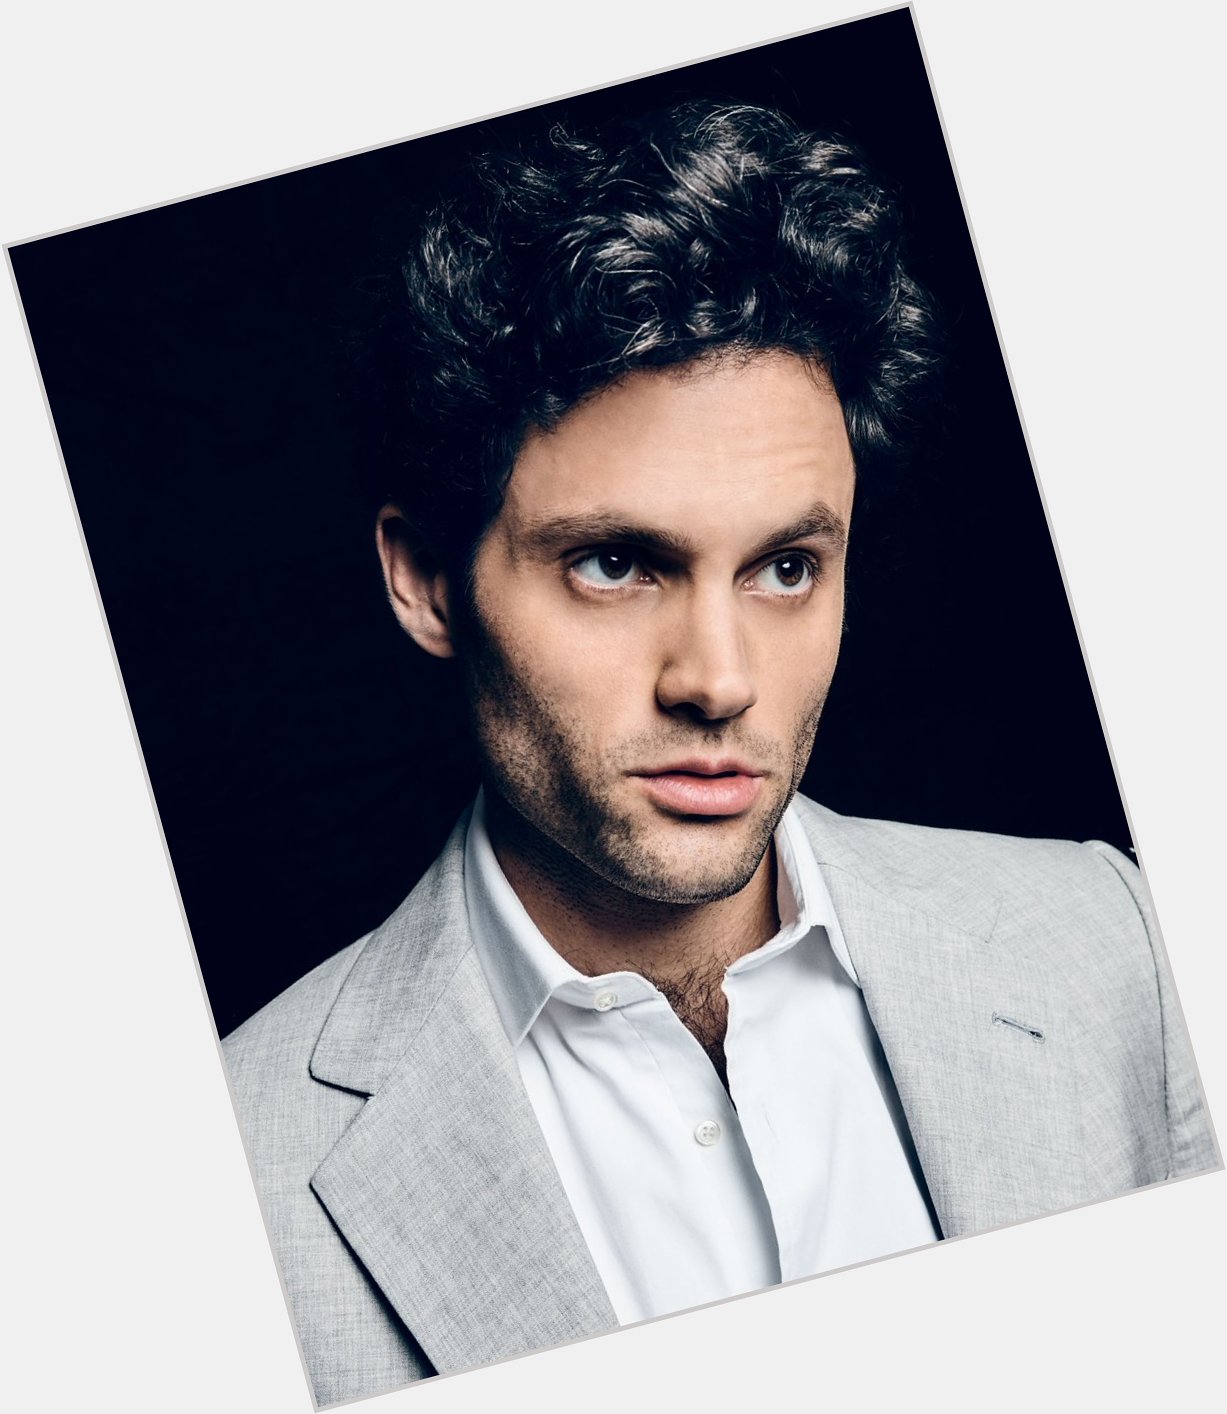 Happy birthday to the gorgeous and talented Penn Badgley! What did you think of the new season of YOU? 